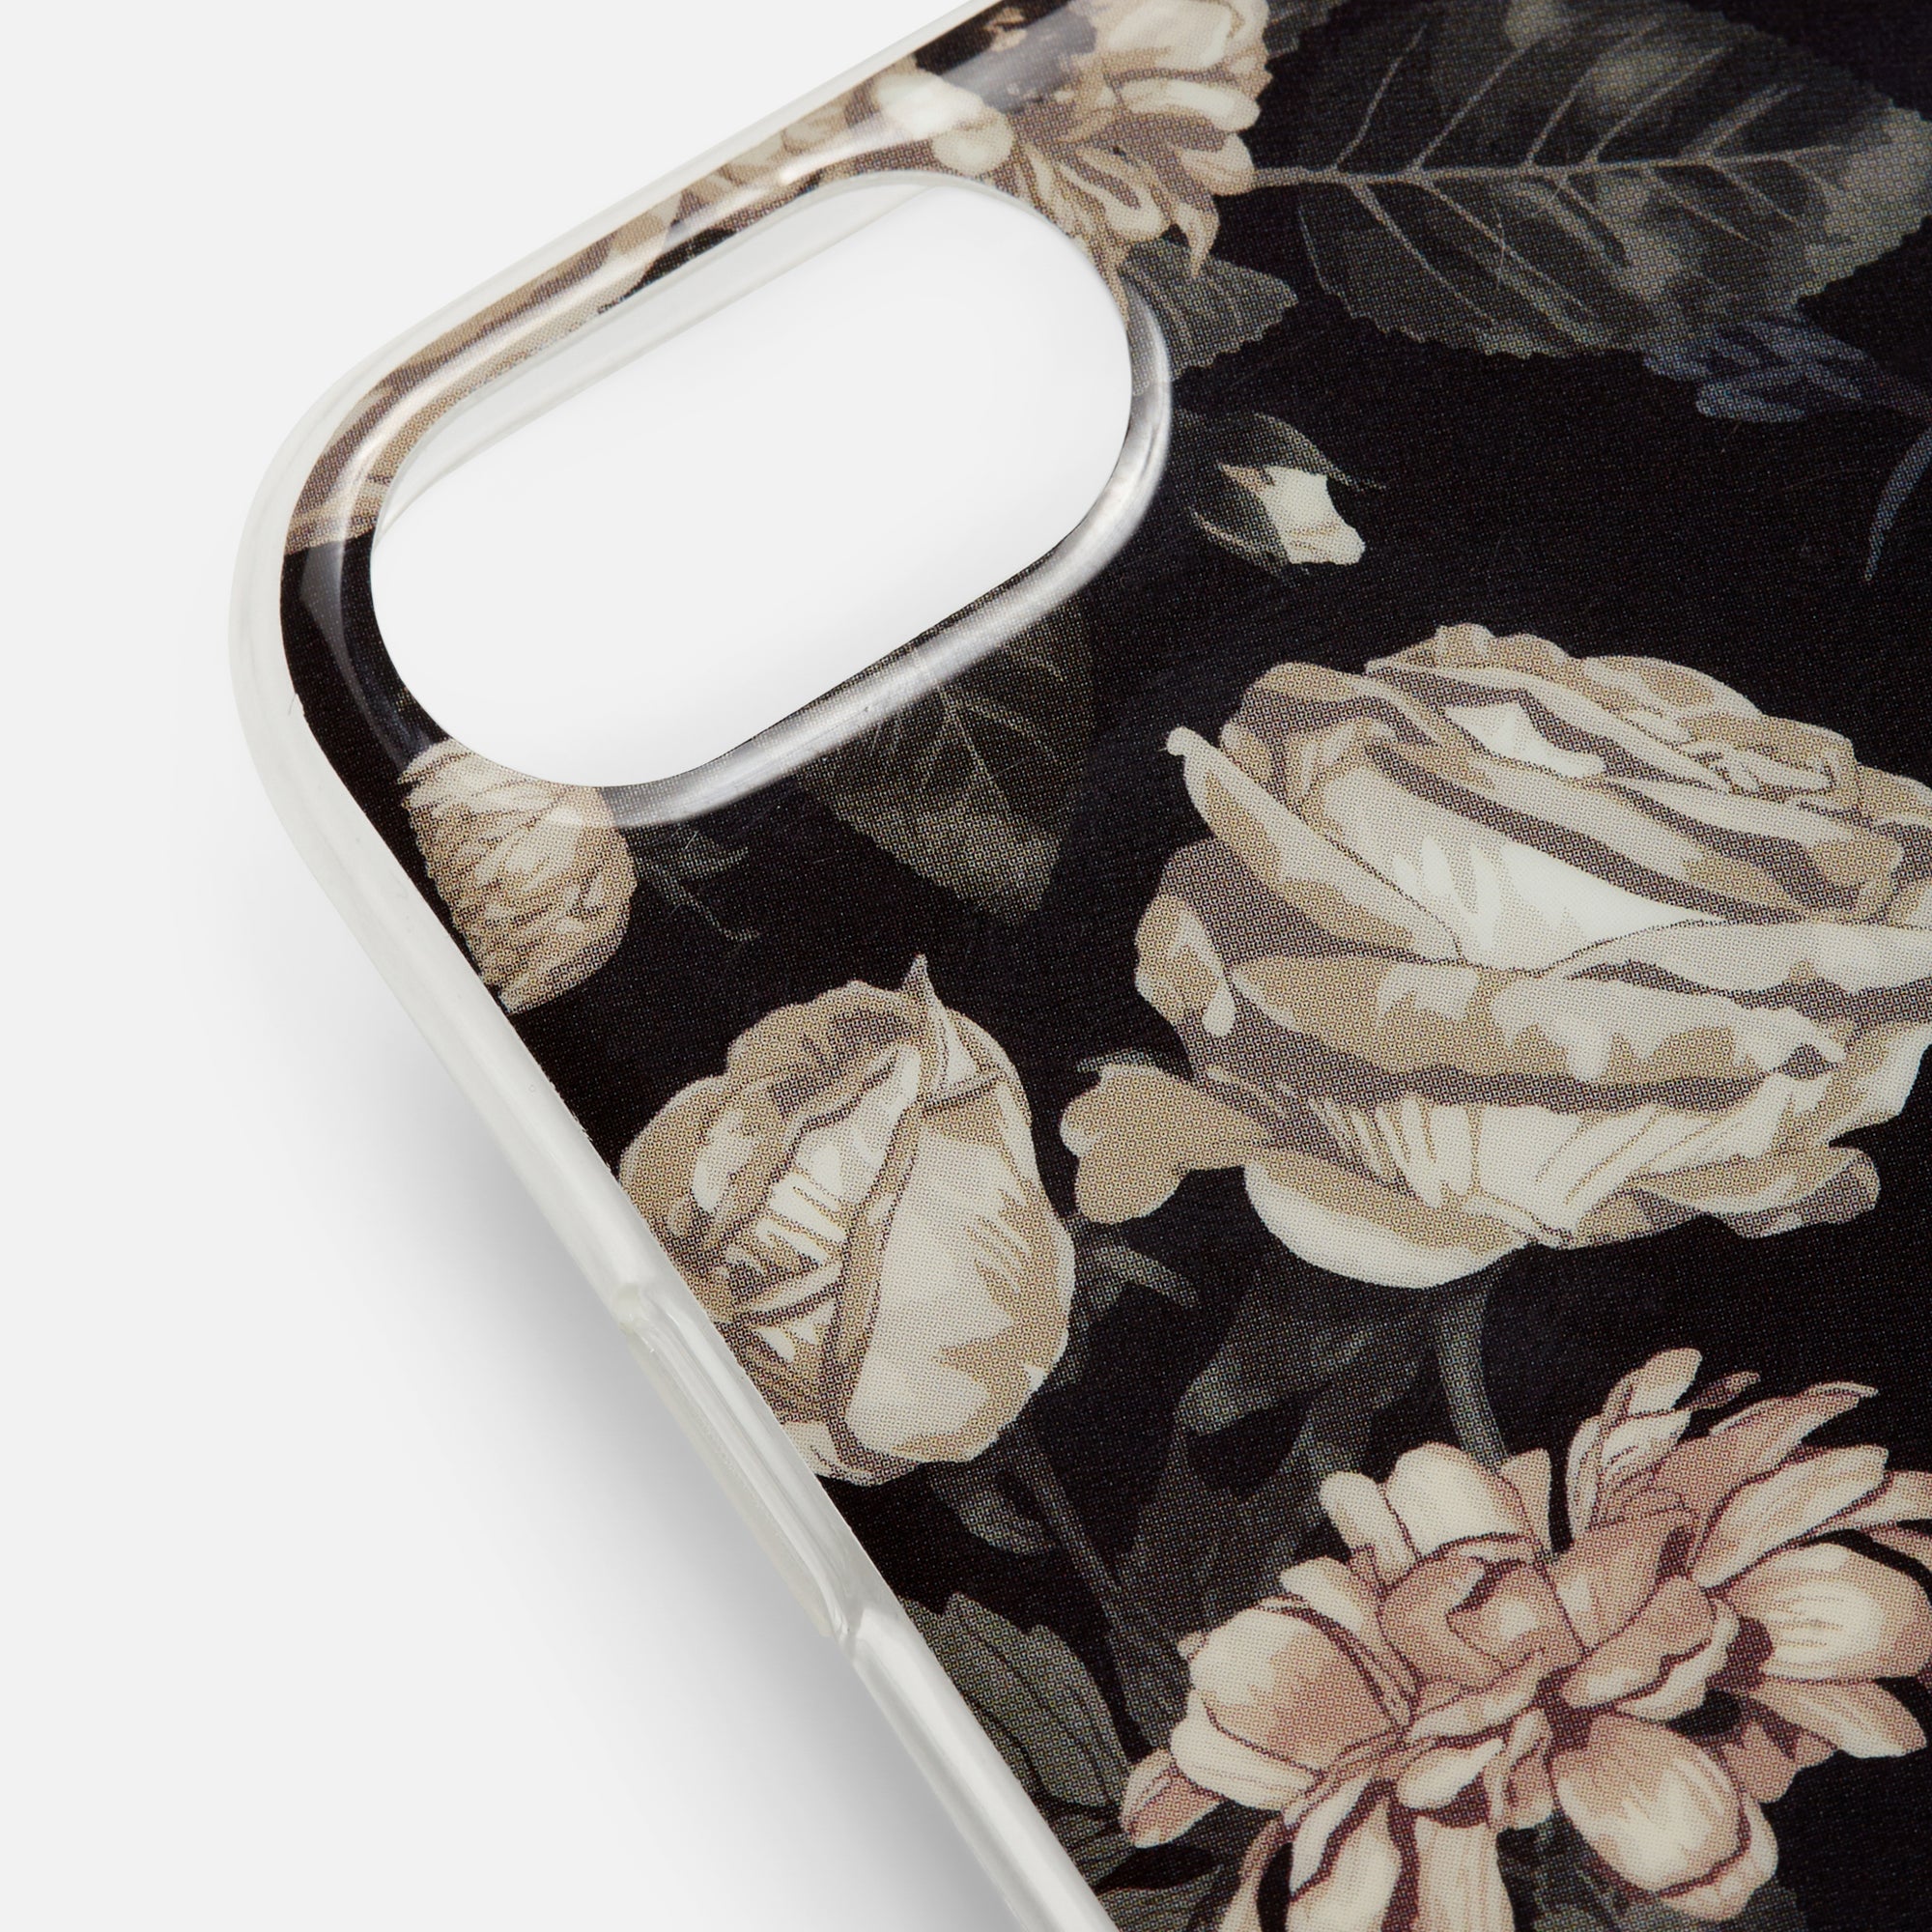 Black Iphone case with flowers